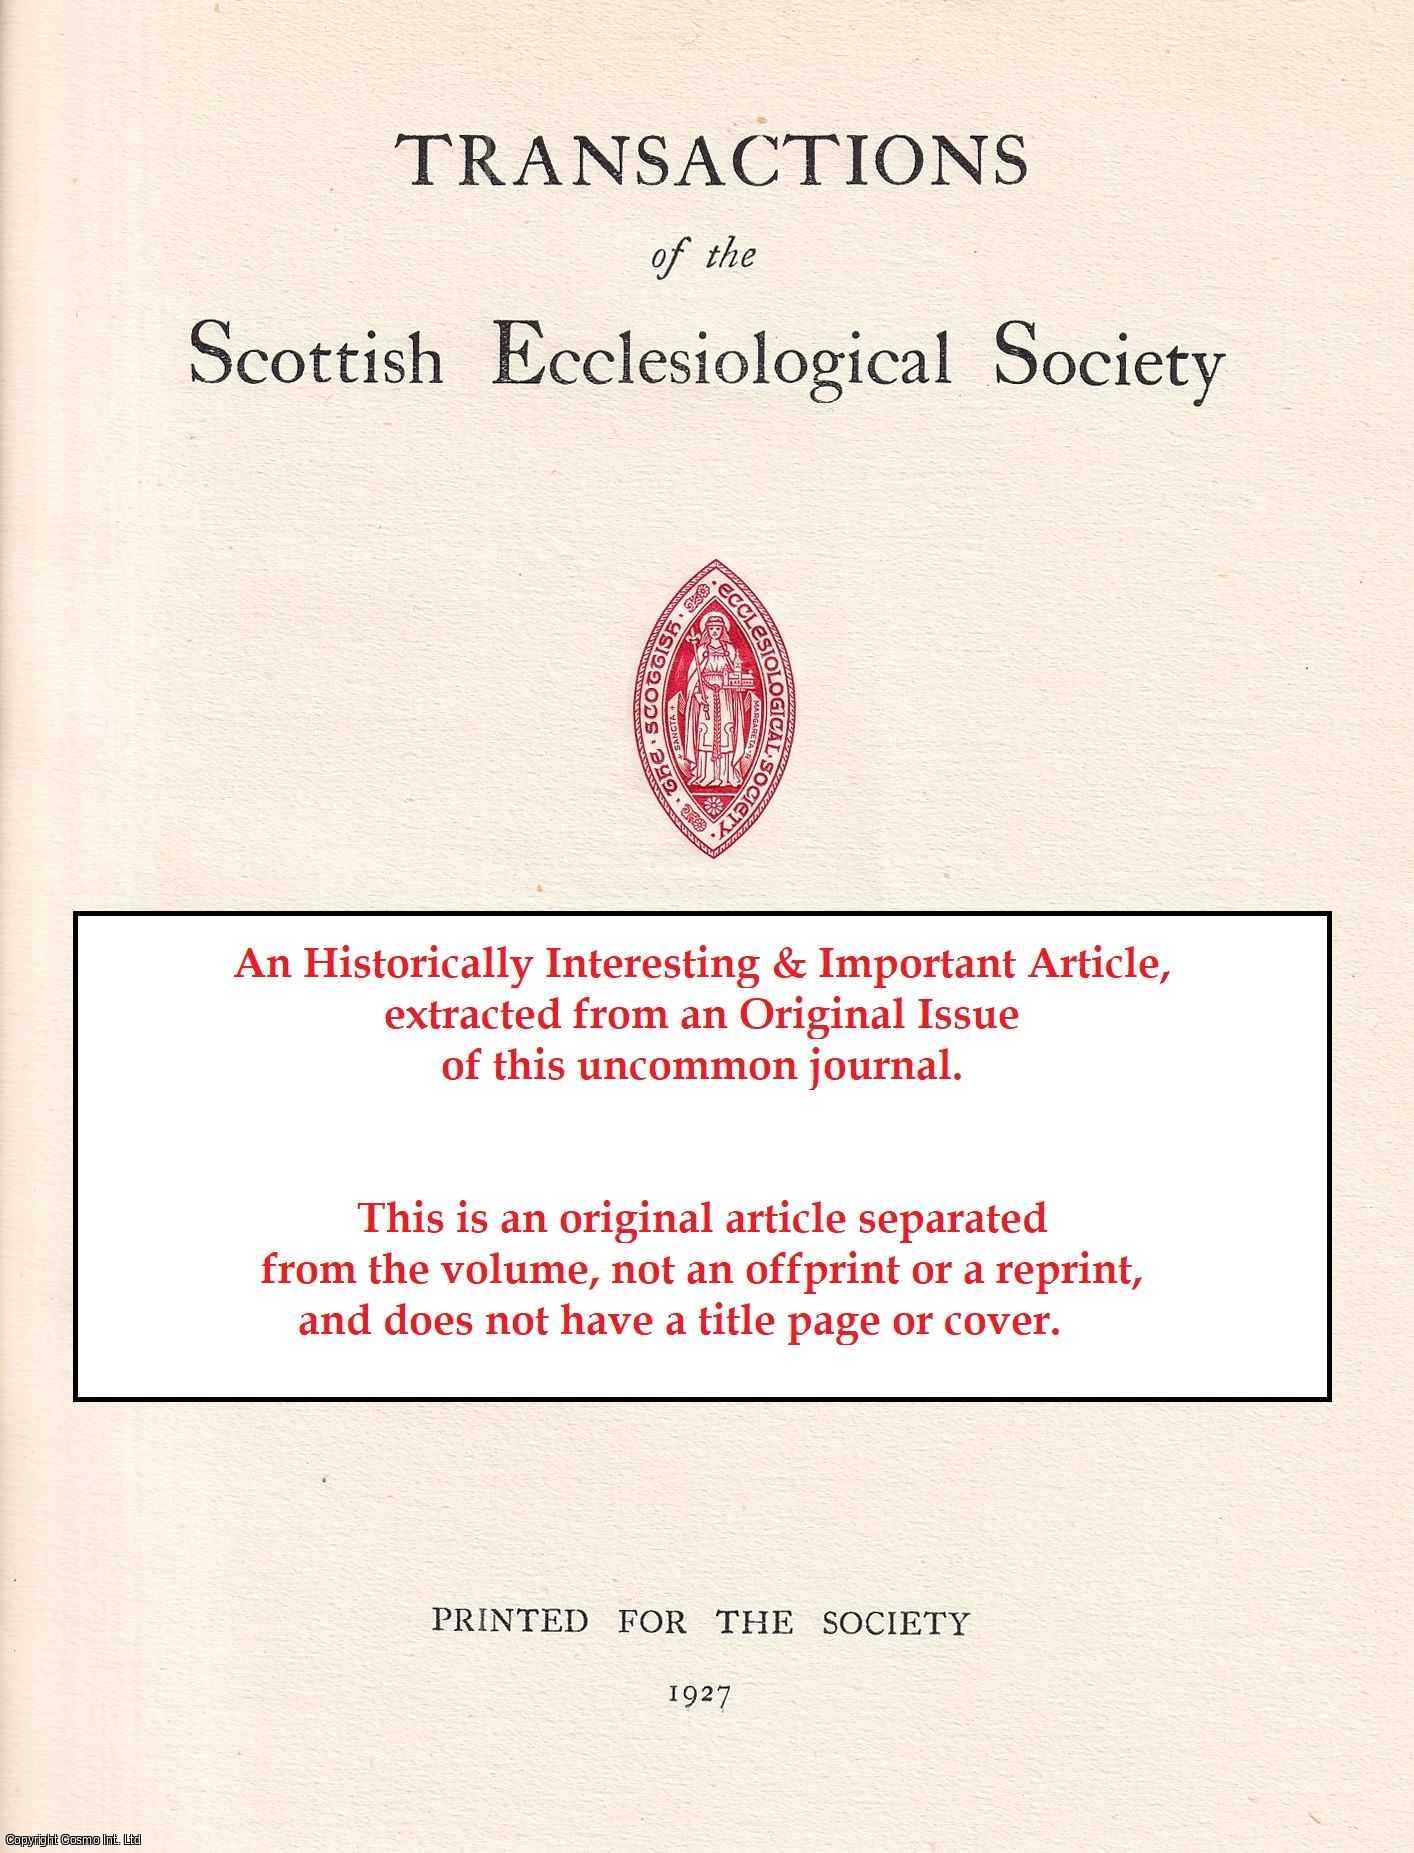 James Cooper - The Fine Arts as Handmaids to the Church's Worship. An original article from the Transactions of the Scottish Ecclesiological Society, 1913.